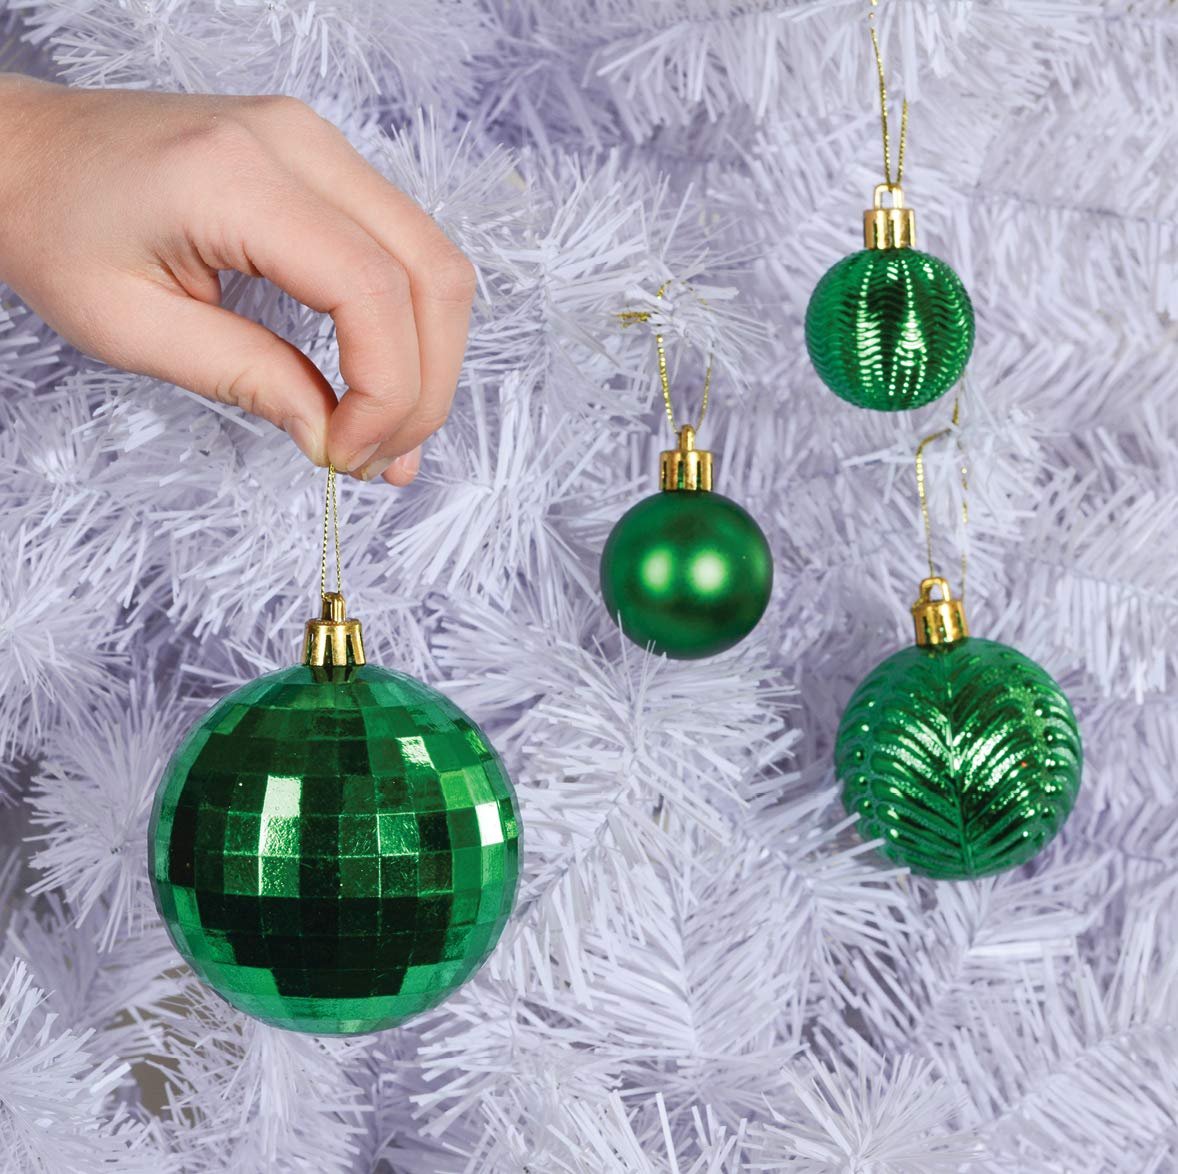 Prextex Christmas Ball Ornaments for Christmas Decorations - 36 pcs Xmas Tree Shatterproof Ornaments with Hanging Loop for Holiday & Party Decorations (6 Styles in 3 Sizes) - Green Christmas Ornaments